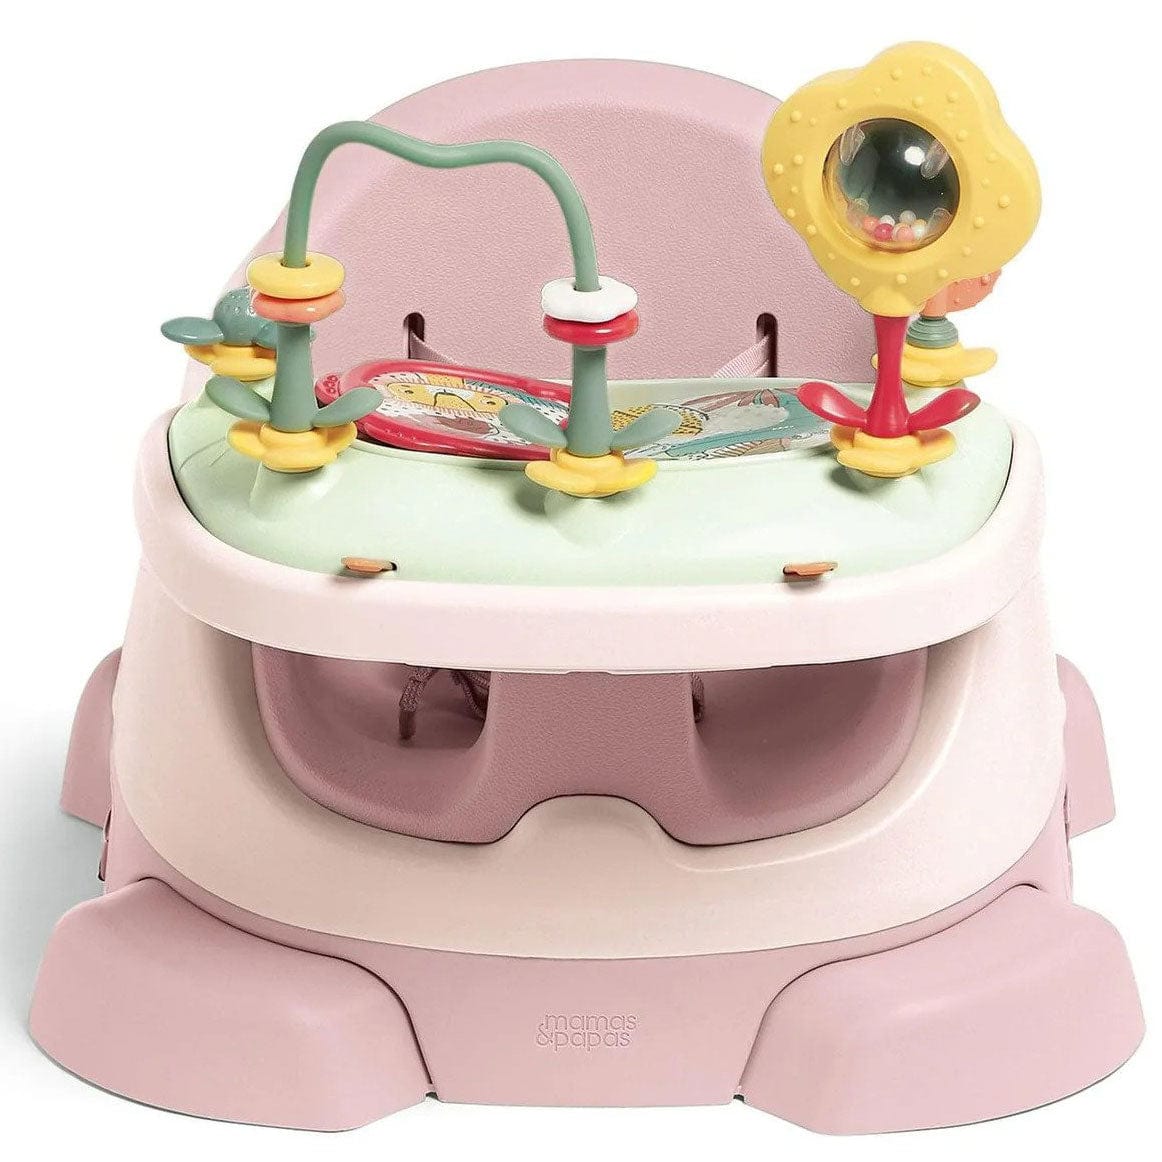 Mamas & Papas Bug 3-in-1 Floor & Booster Seat with Activity Tray in Blossom Activity Toys 9868L7400 5057232699217